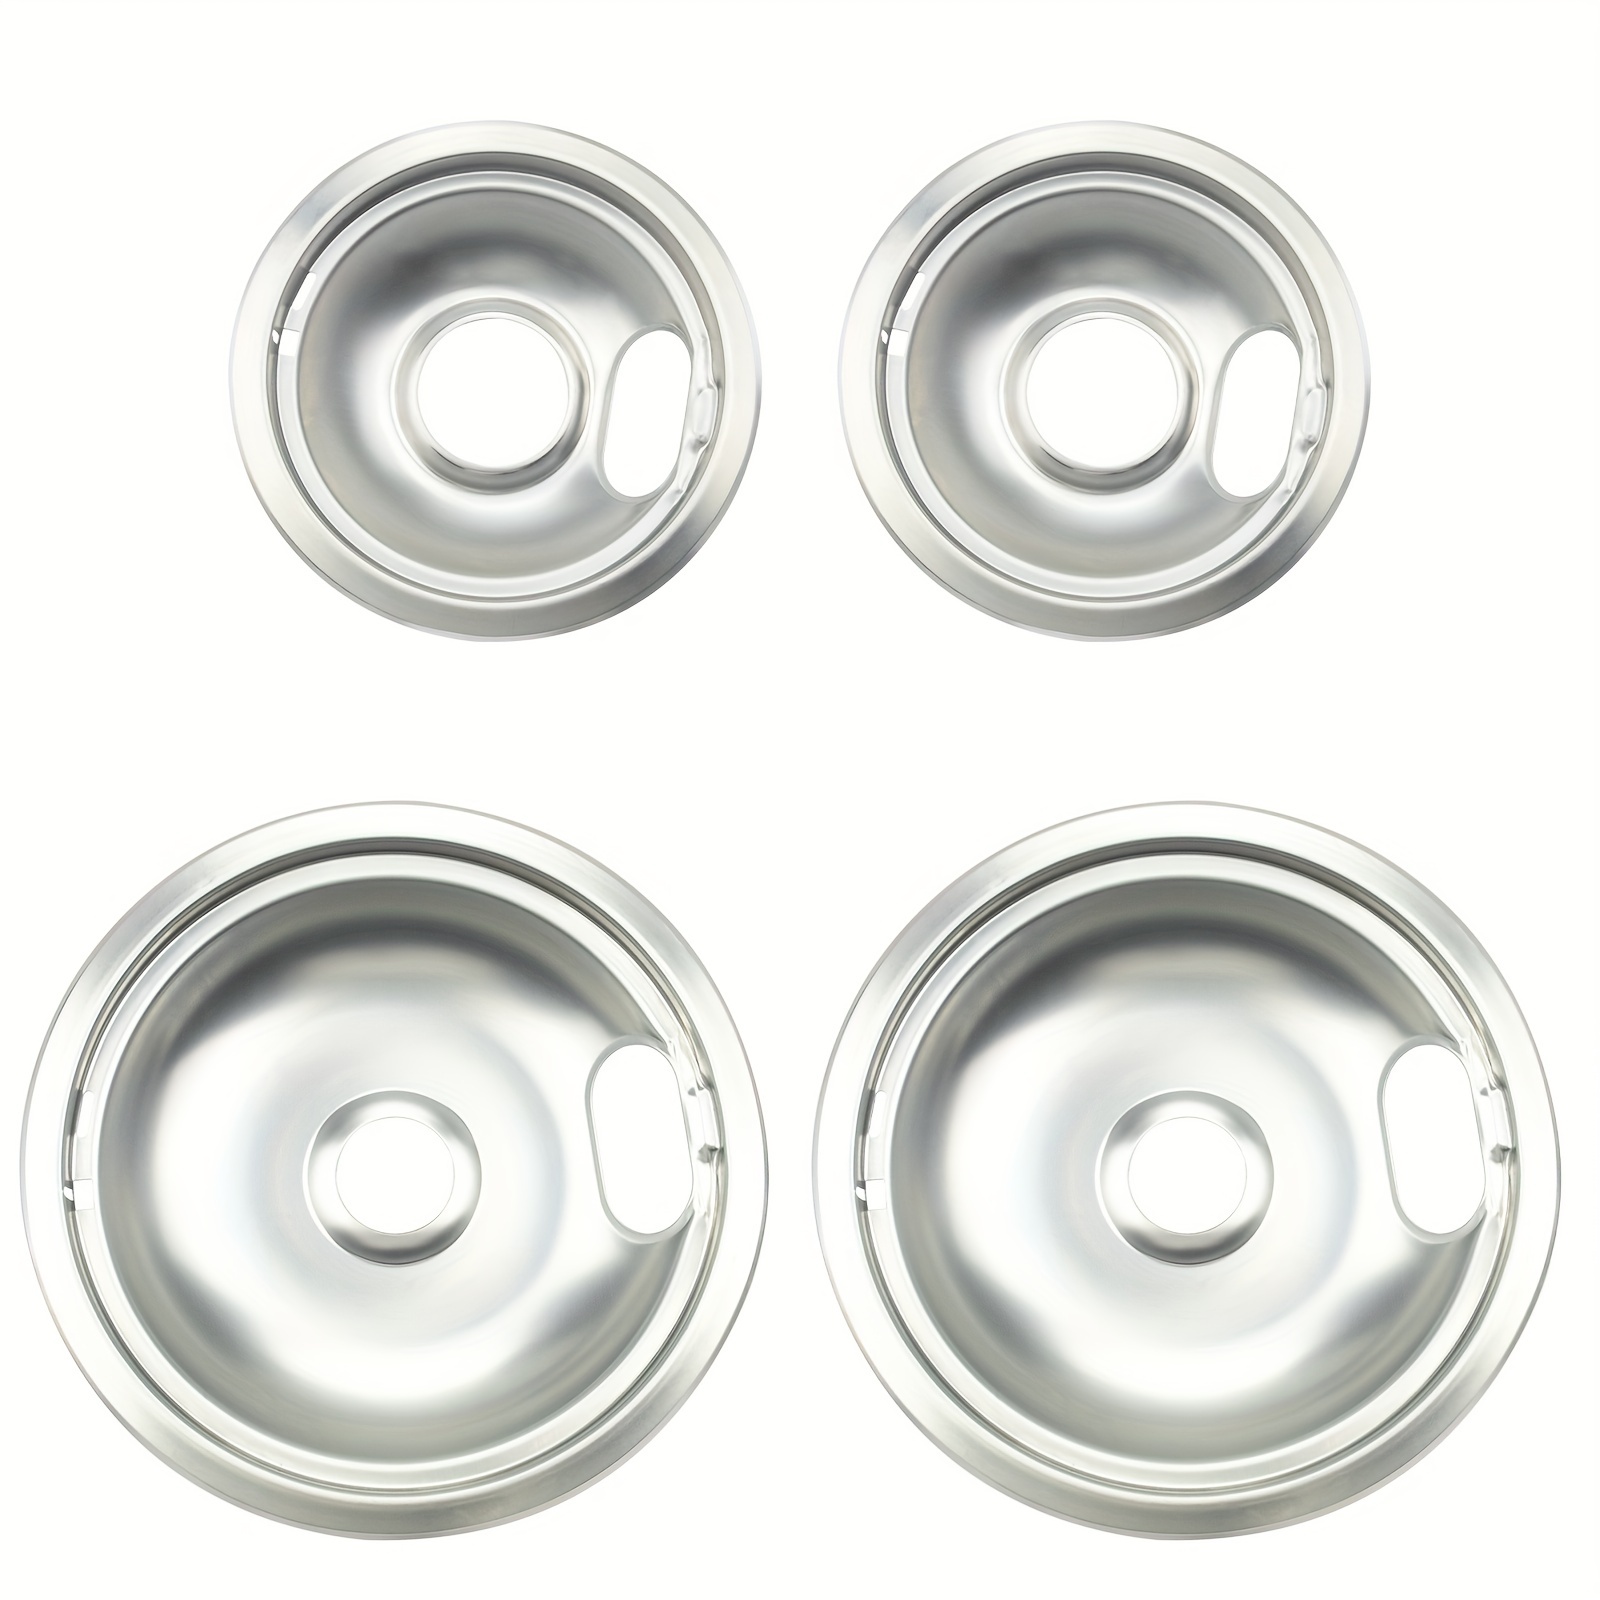 WB31M15 & WB31M16 Drip Pans Compatible replacement for GE/Hotpoint electric  range Stove Burner covers General electric stove parts & Hotpoint stove